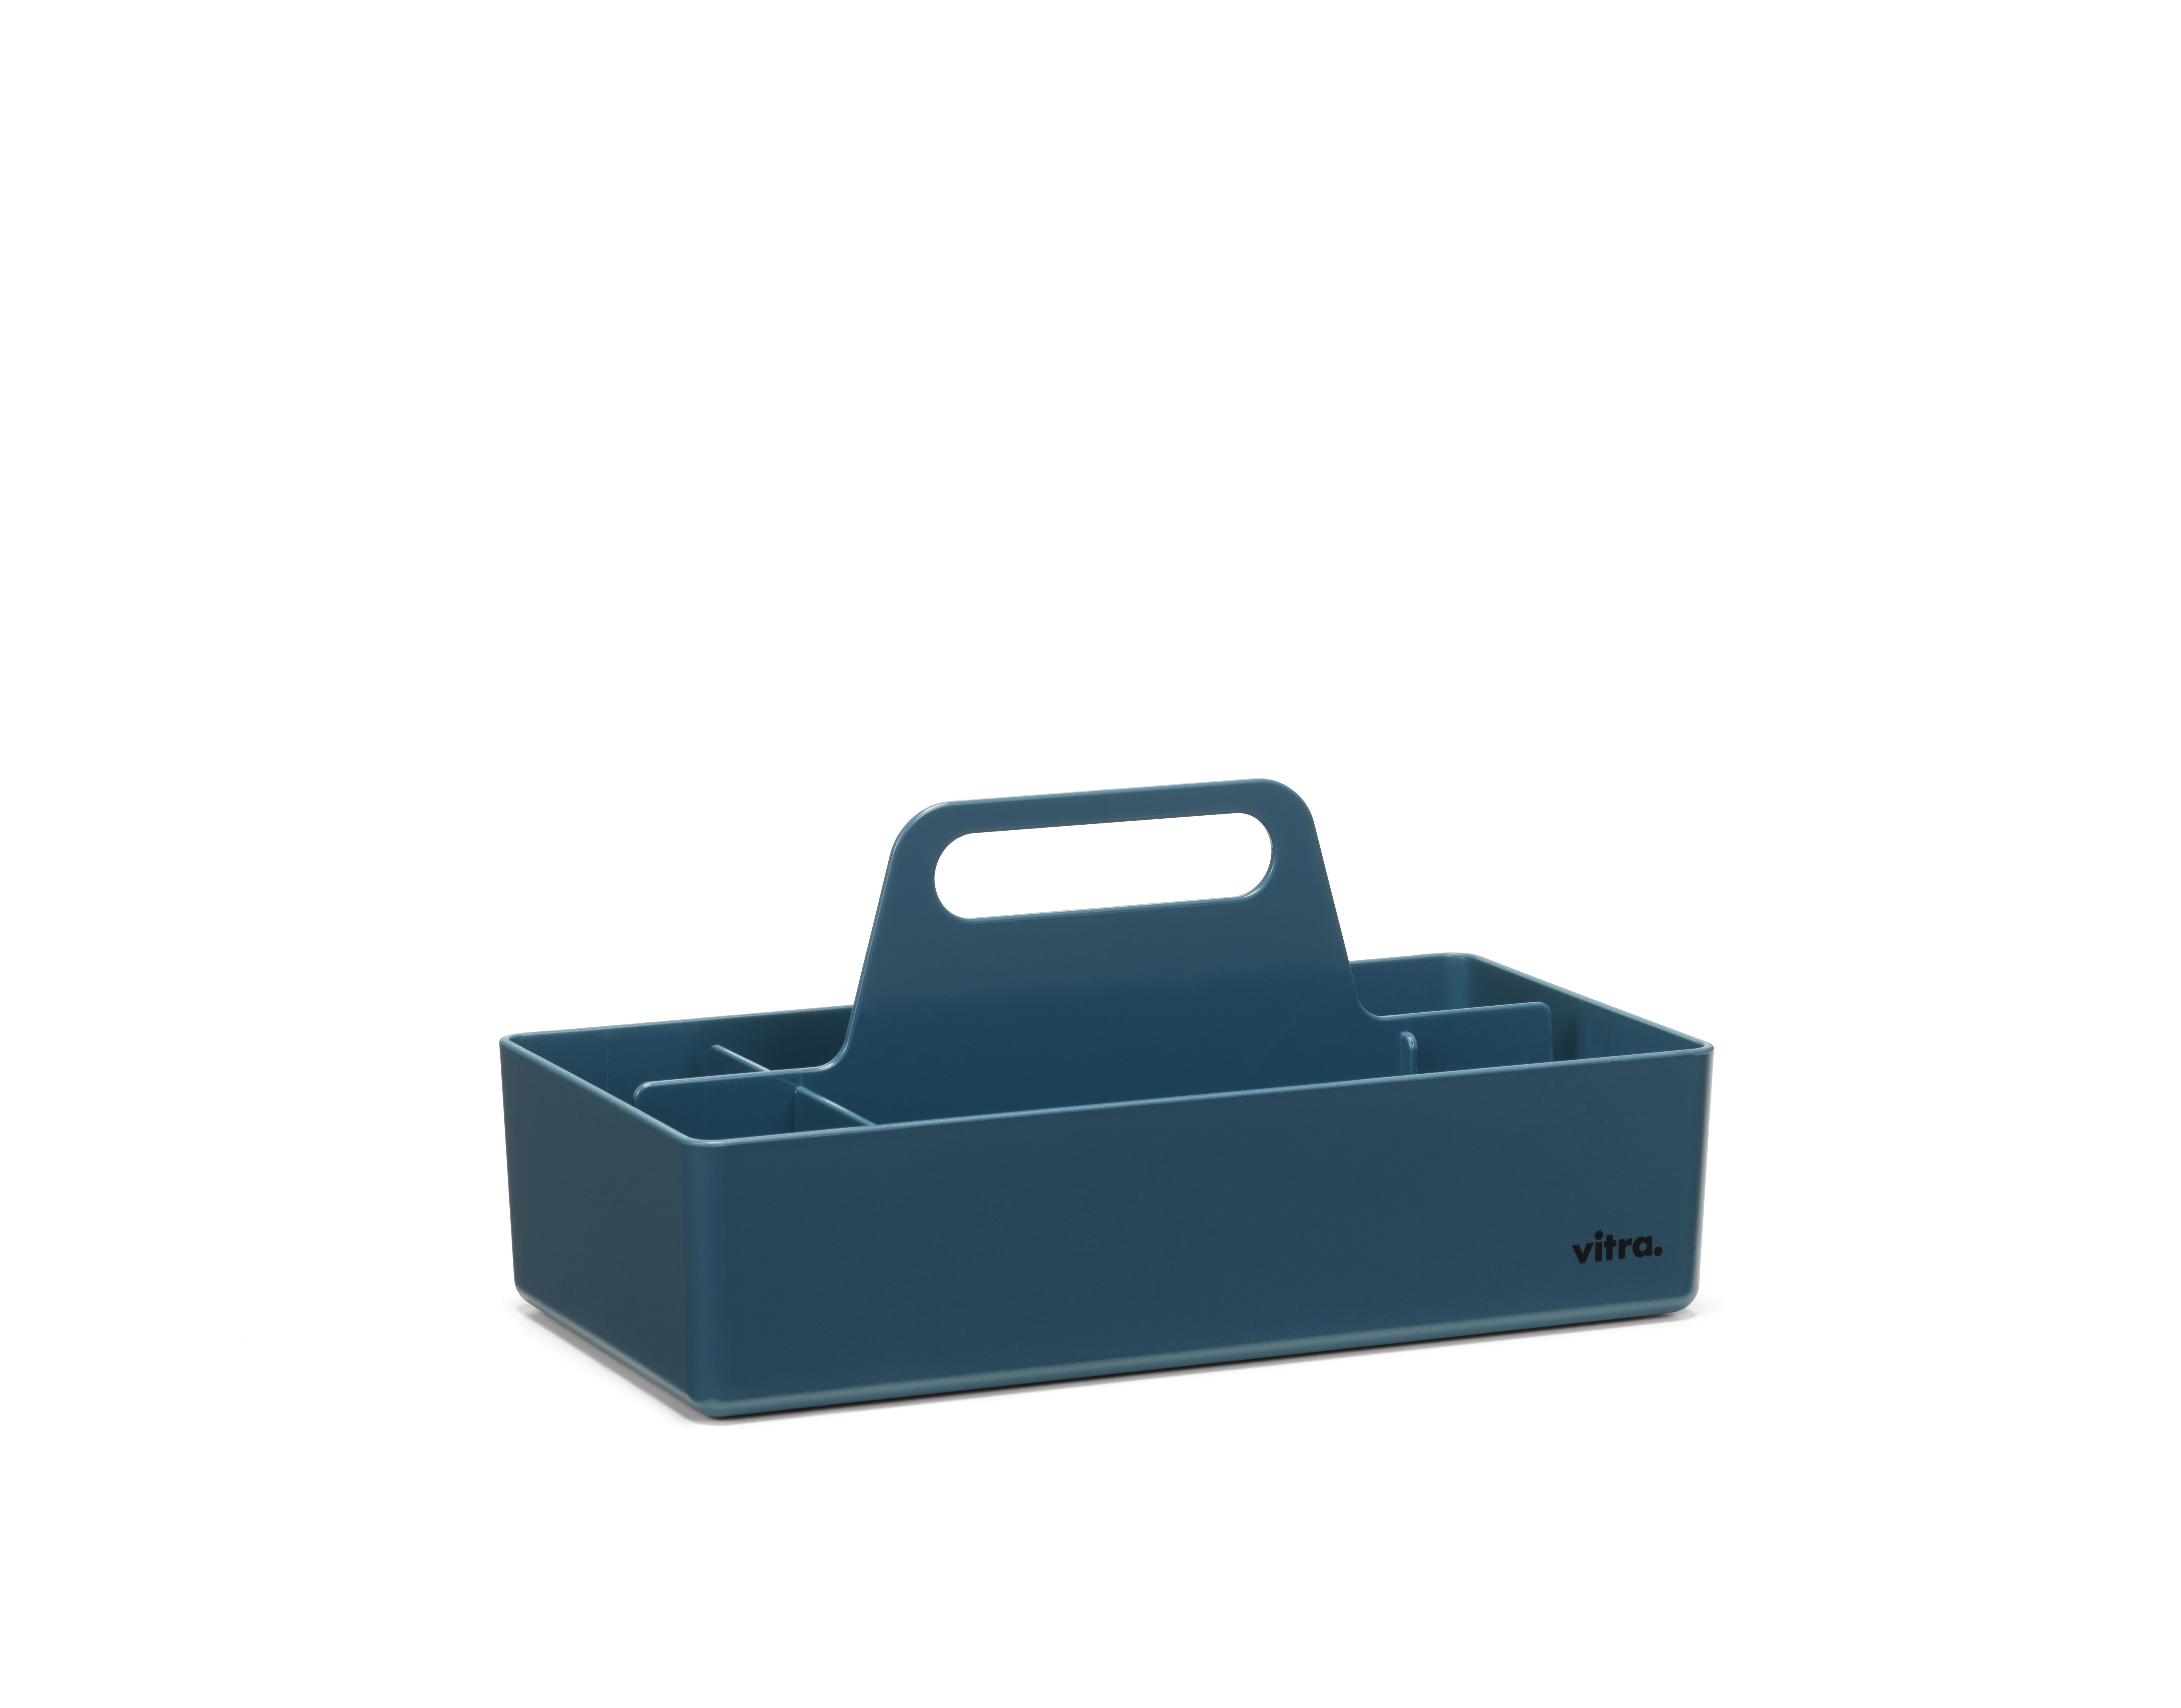 The Toolbox by Arik Levy is designed as a practical organisational utensil for storing accessories and small items. Thanks to its handy size, it can be easily stowed in a cabinet or on a shelf, and it takes up little room on a table. The Toolbox is